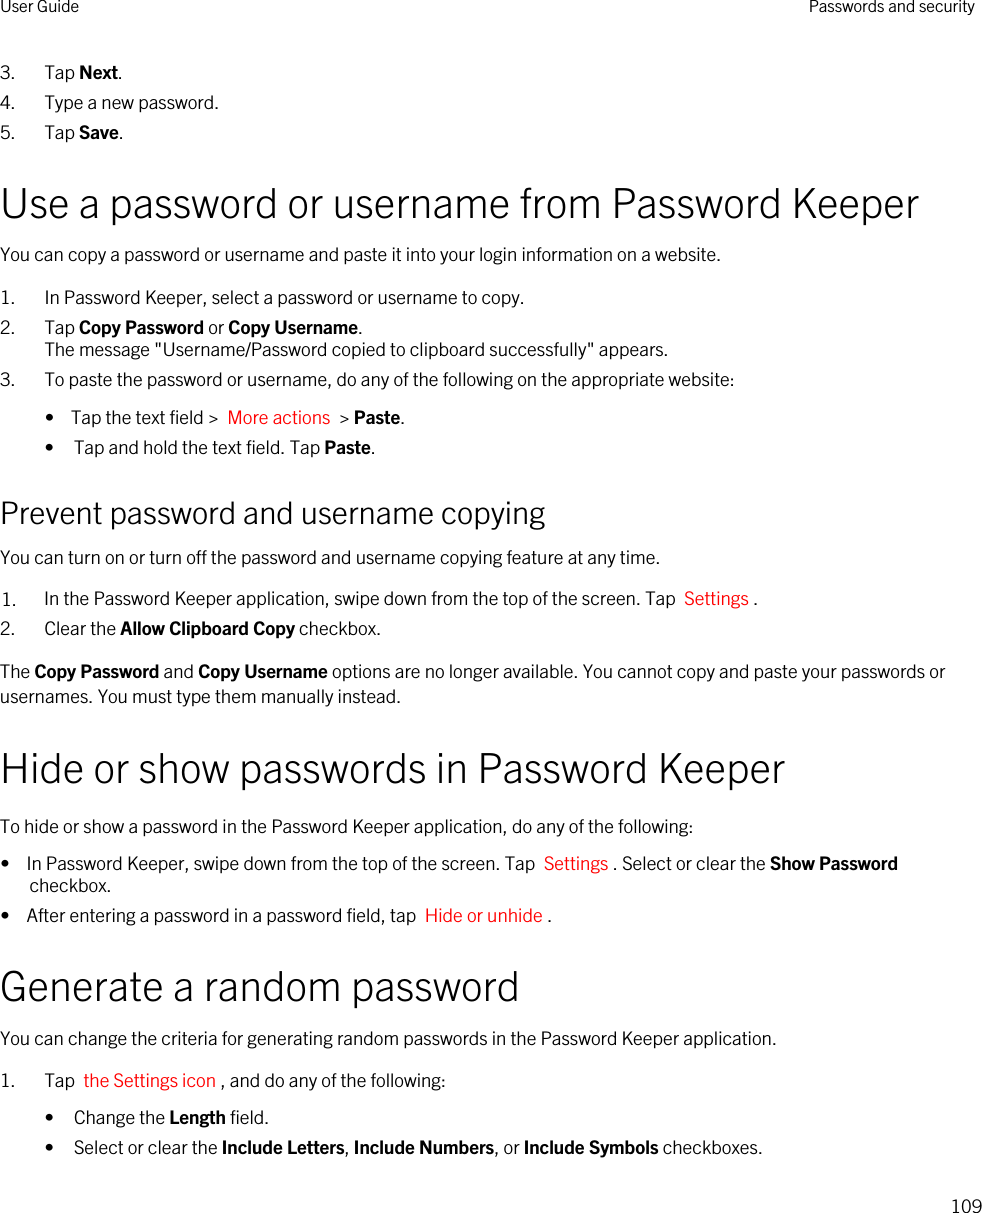 3. Tap Next.4. Type a new password.5. Tap Save.Use a password or username from Password KeeperYou can copy a password or username and paste it into your login information on a website.1. In Password Keeper, select a password or username to copy.2. Tap Copy Password or Copy Username.The message &quot;Username/Password copied to clipboard successfully&quot; appears.3. To paste the password or username, do any of the following on the appropriate website:•  Tap the text field &gt;  More actions  &gt; Paste.• Tap and hold the text field. Tap Paste.Prevent password and username copyingYou can turn on or turn off the password and username copying feature at any time.1. In the Password Keeper application, swipe down from the top of the screen. Tap  Settings .2. Clear the Allow Clipboard Copy checkbox.The Copy Password and Copy Username options are no longer available. You cannot copy and paste your passwords or usernames. You must type them manually instead.Hide or show passwords in Password KeeperTo hide or show a password in the Password Keeper application, do any of the following:•  In Password Keeper, swipe down from the top of the screen. Tap  Settings . Select or clear the Show Password checkbox.•  After entering a password in a password field, tap  Hide or unhide .Generate a random passwordYou can change the criteria for generating random passwords in the Password Keeper application.1. Tap  the Settings icon , and do any of the following:• Change the Length field.• Select or clear the Include Letters, Include Numbers, or Include Symbols checkboxes.User Guide Passwords and security109